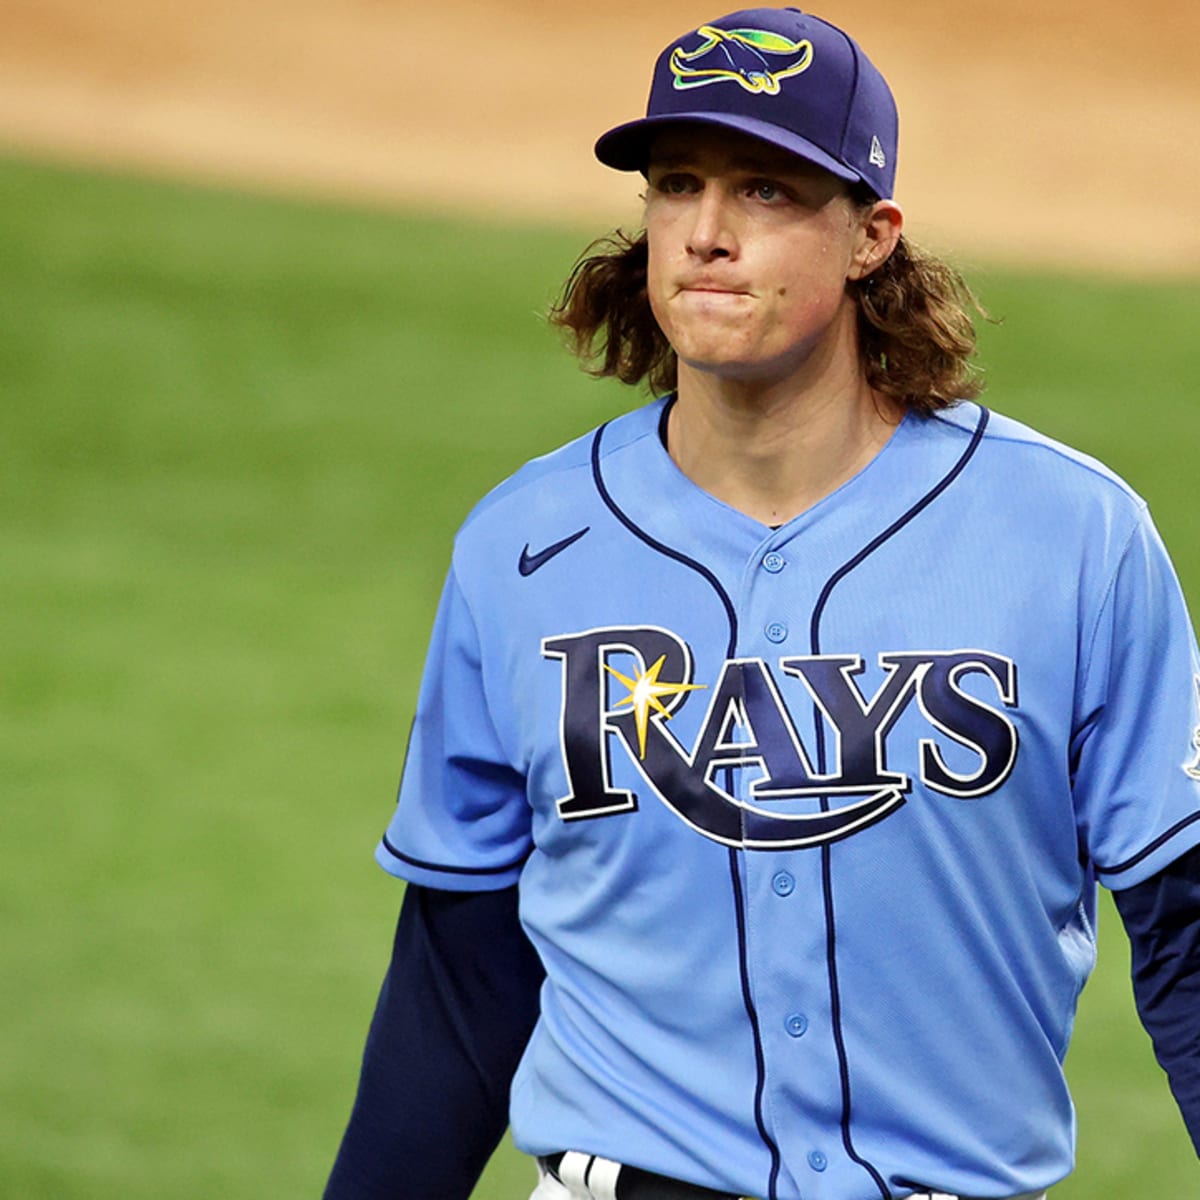 Sports World in Disbelief Over Rays Pitcher Bearing Striking Resemblance to  Cillian Murphy - Sports Illustrated